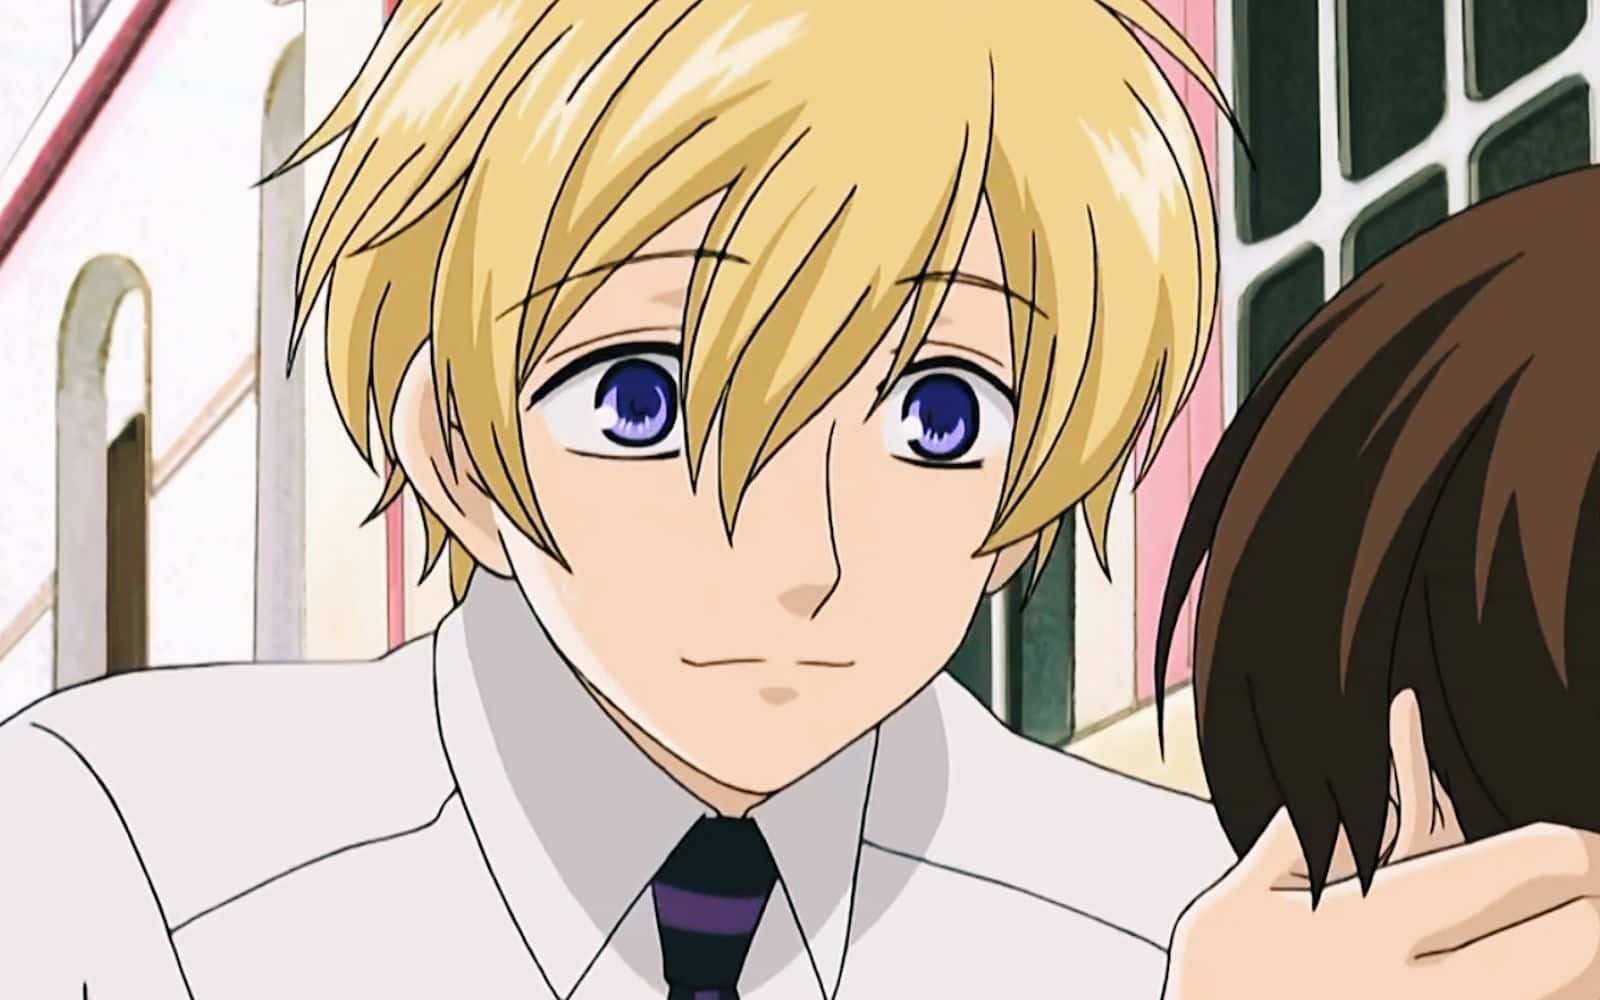 Tamaki Suoh striking a confident pose in Ouran High School Host Club Wallpaper